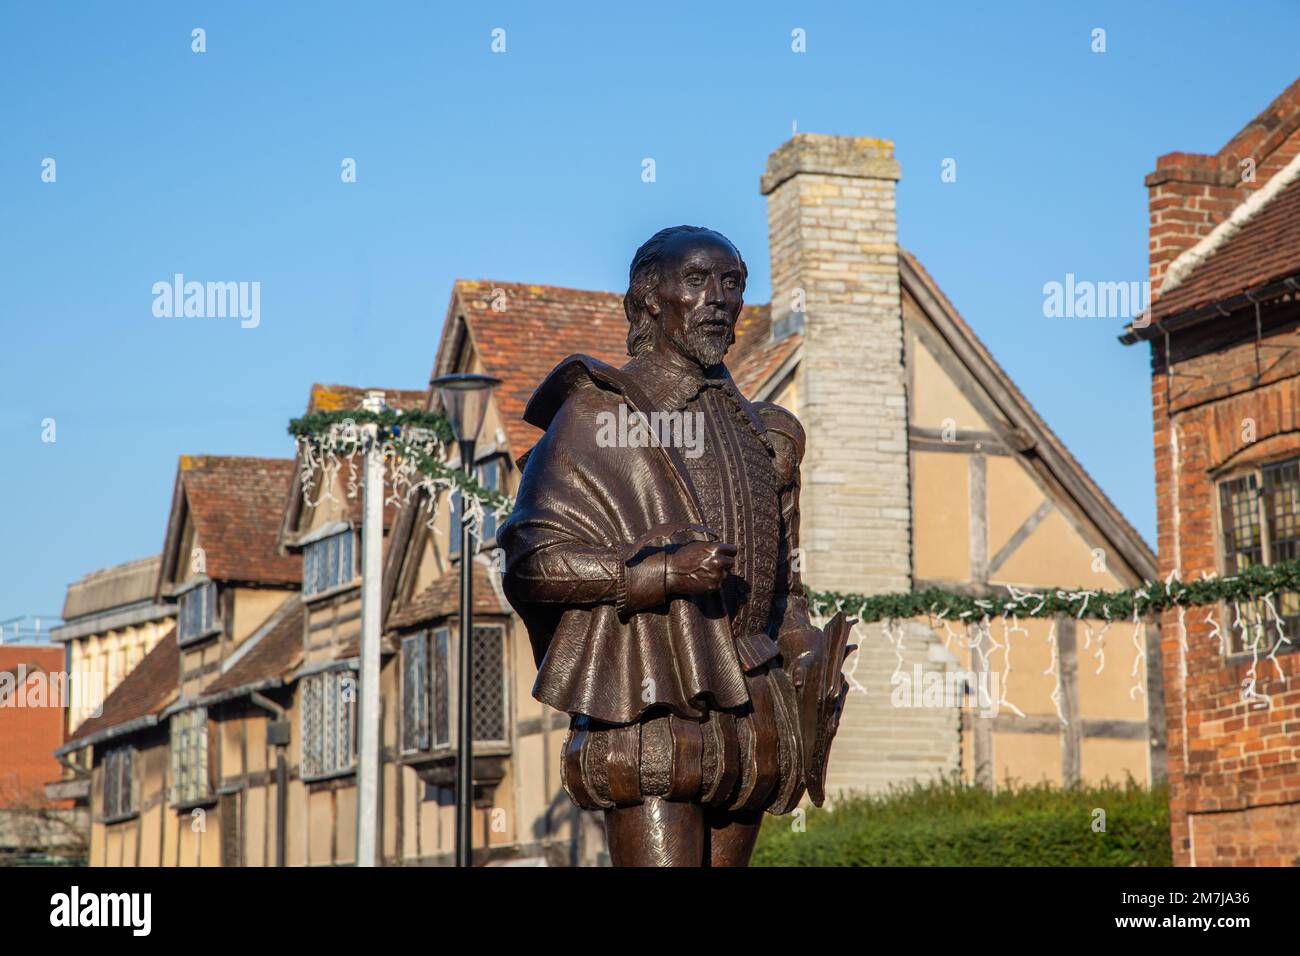 Statue monument to the playwright William Shakespeare in the Warwickshire town of Stratford on Avon Stock Photo